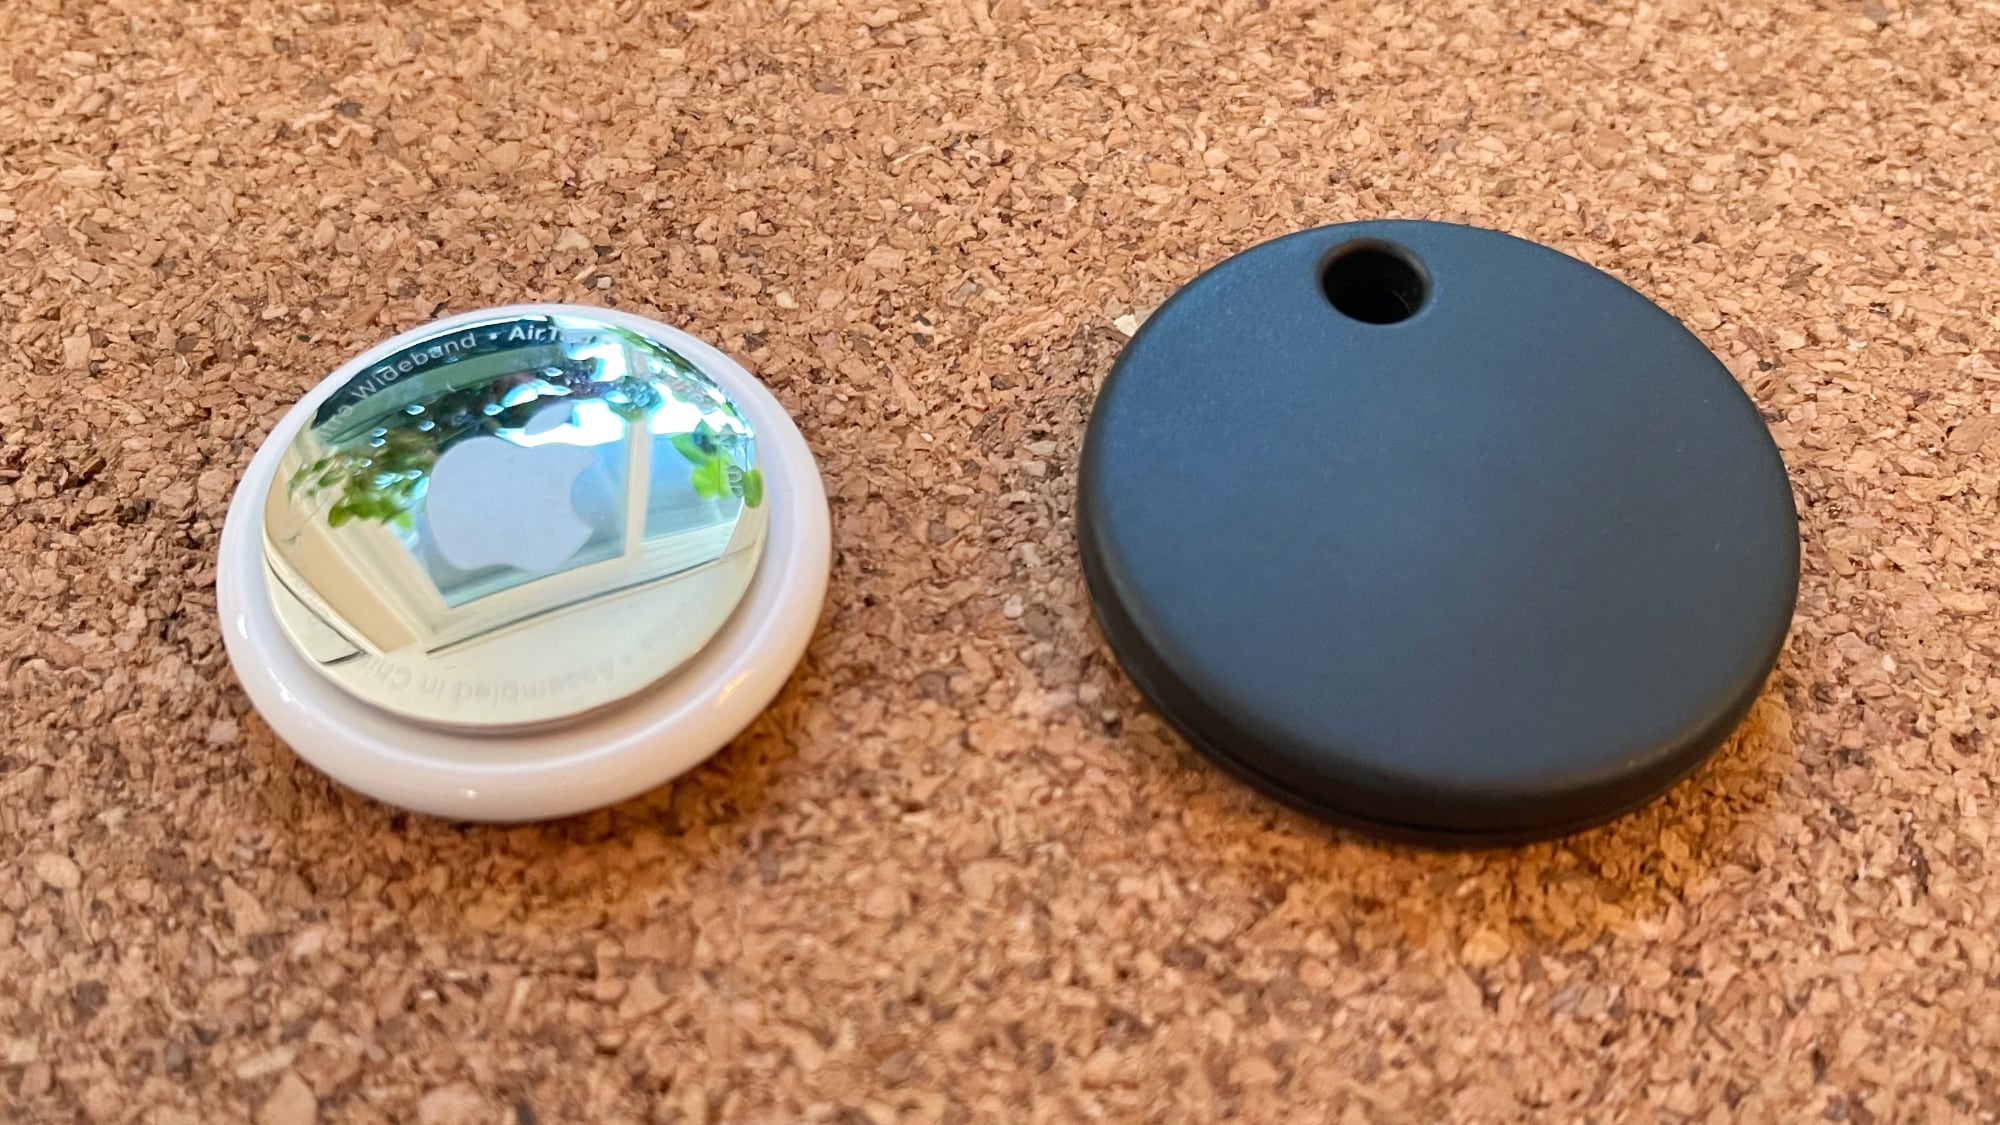 Chipolo One Spot review: Just like an Apple AirTag - Gearbrain